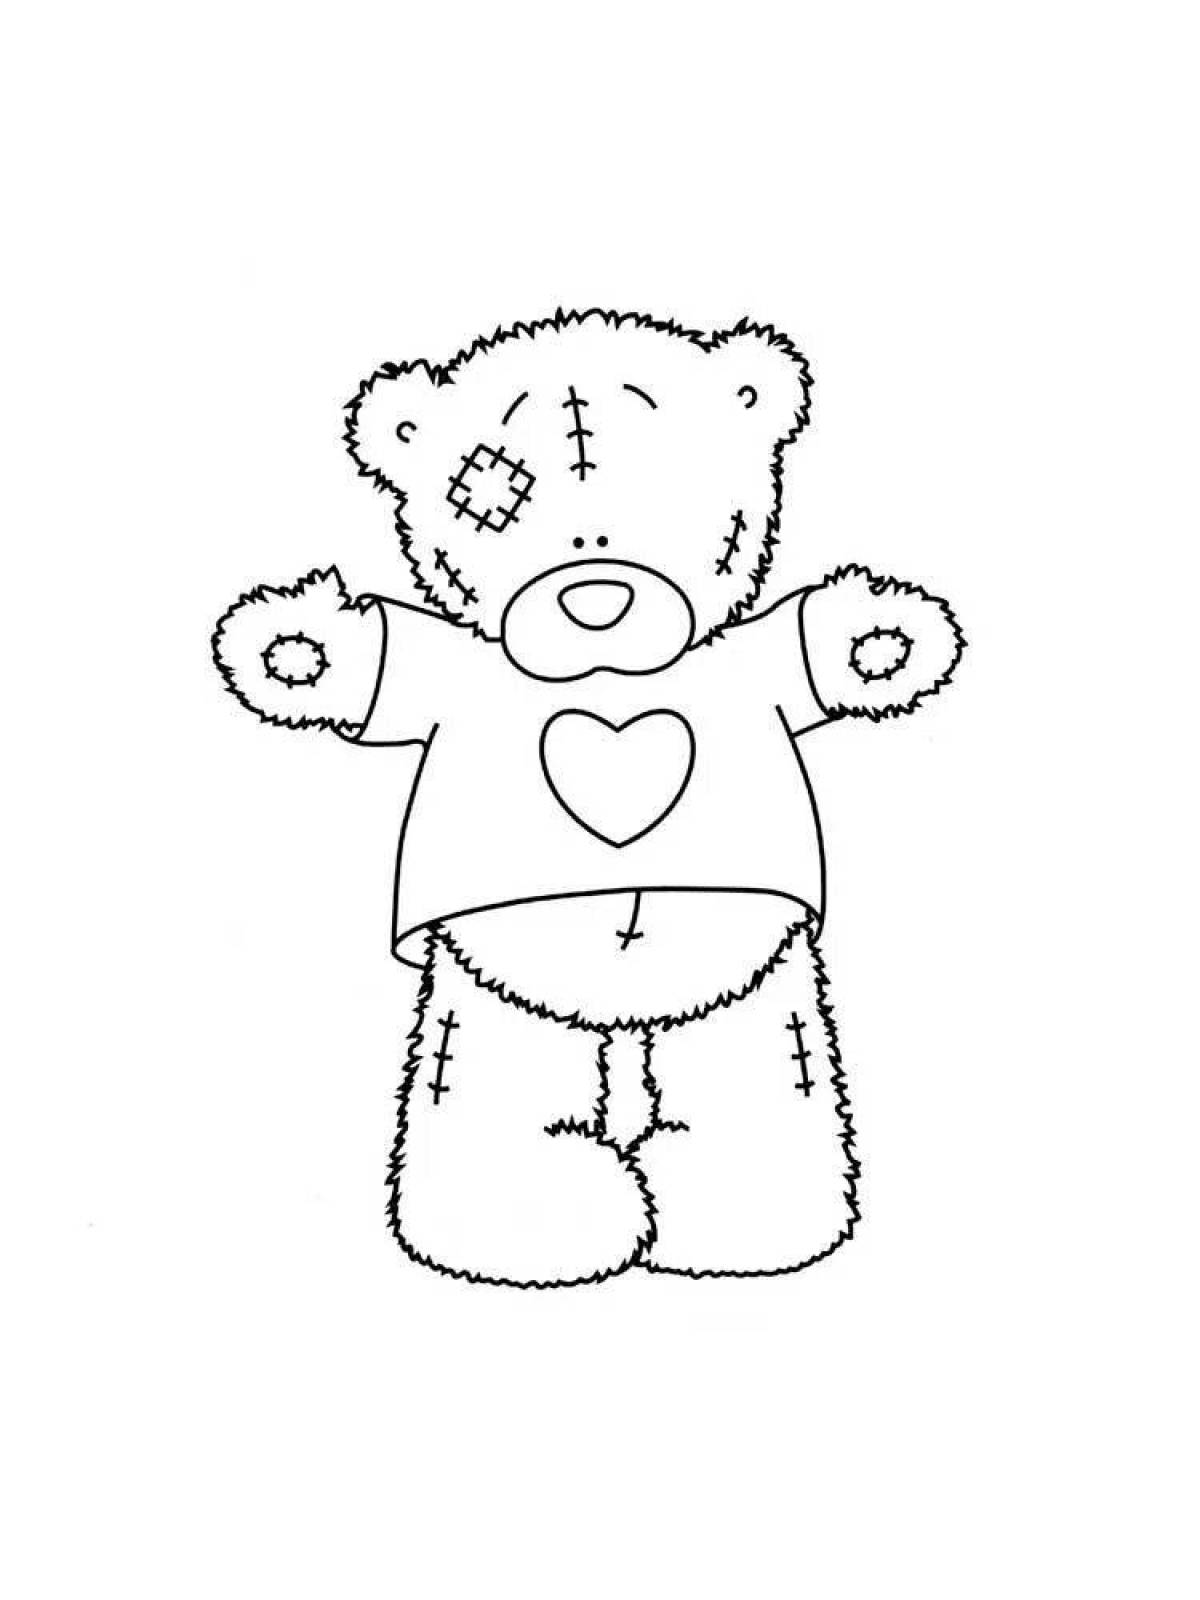 Grinning teddy bear coloring book